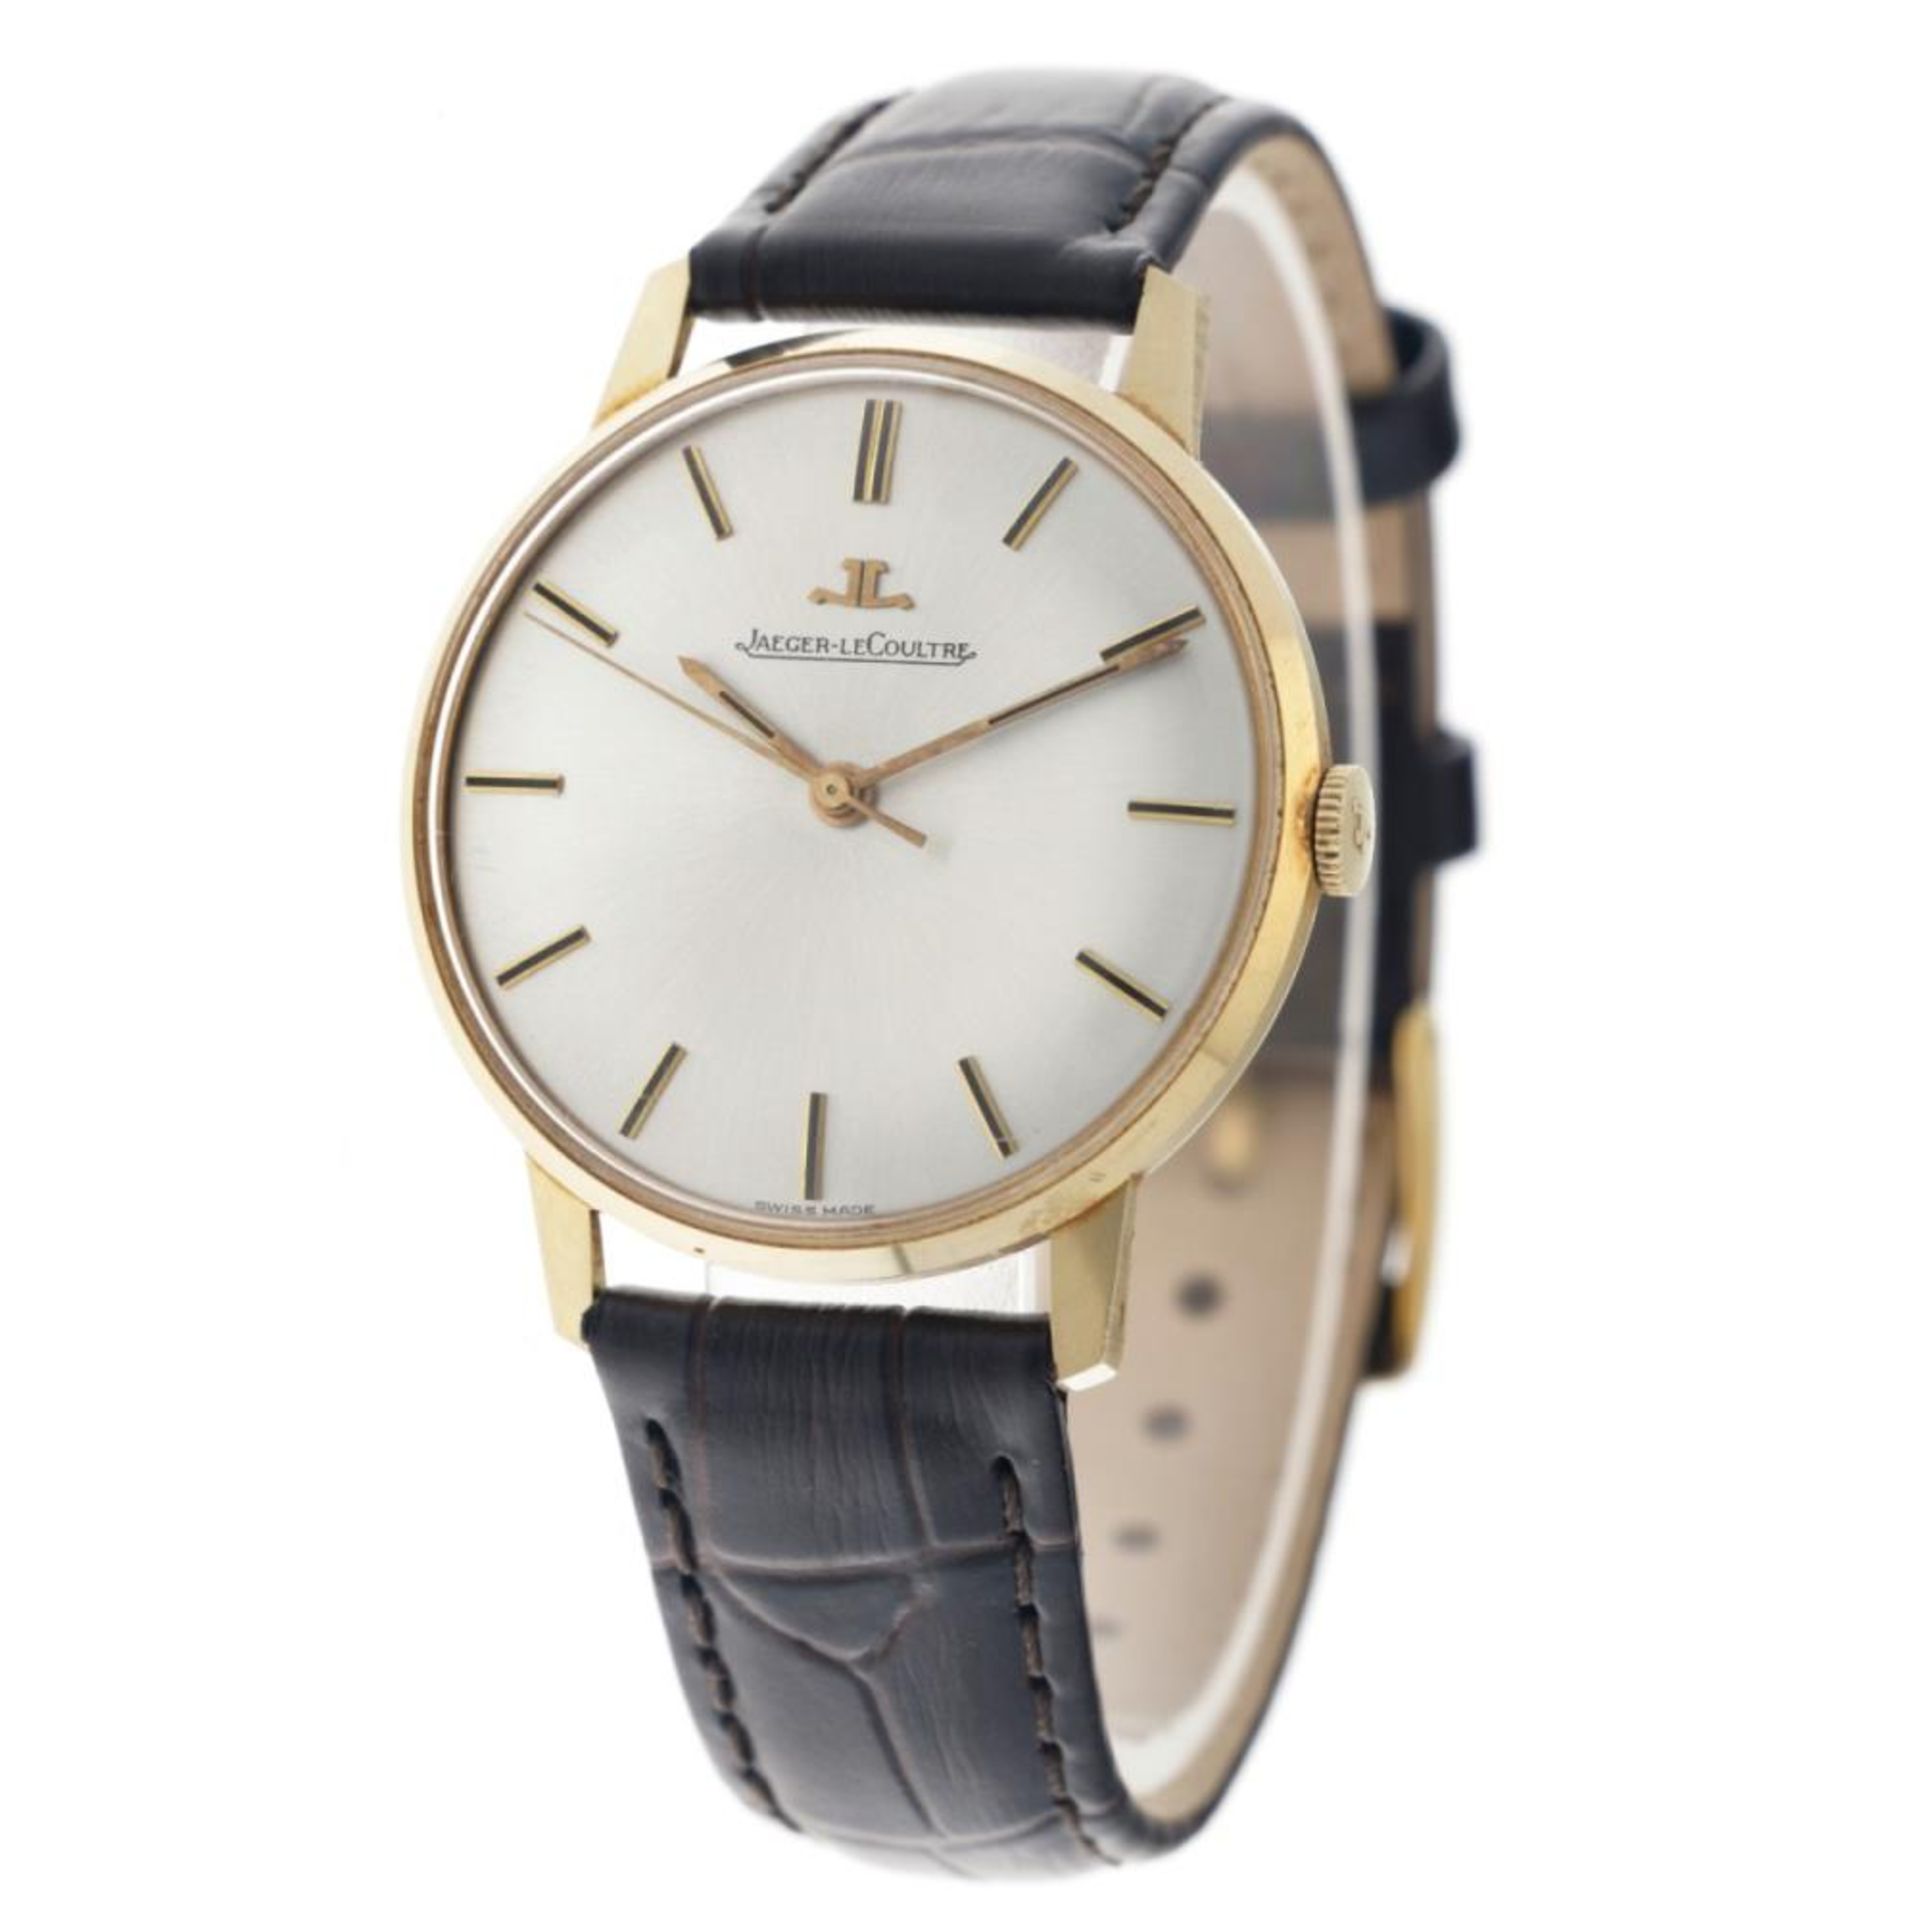 Jaeger-LeCoultre vintage dress watch 20007 -Men's watch - approx. 1965. - Image 3 of 10